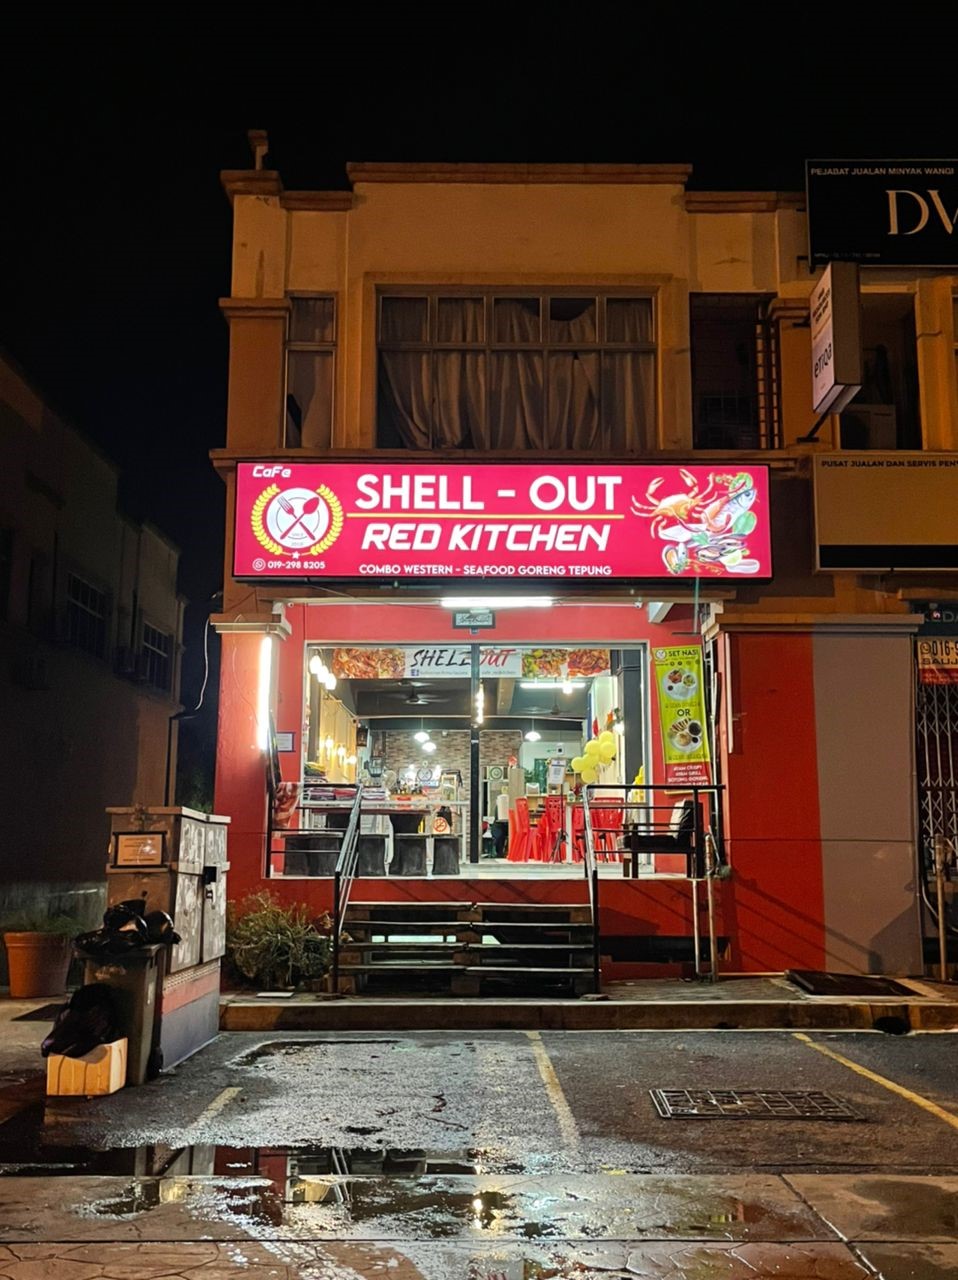 SHELLOUT RED KITCHEN